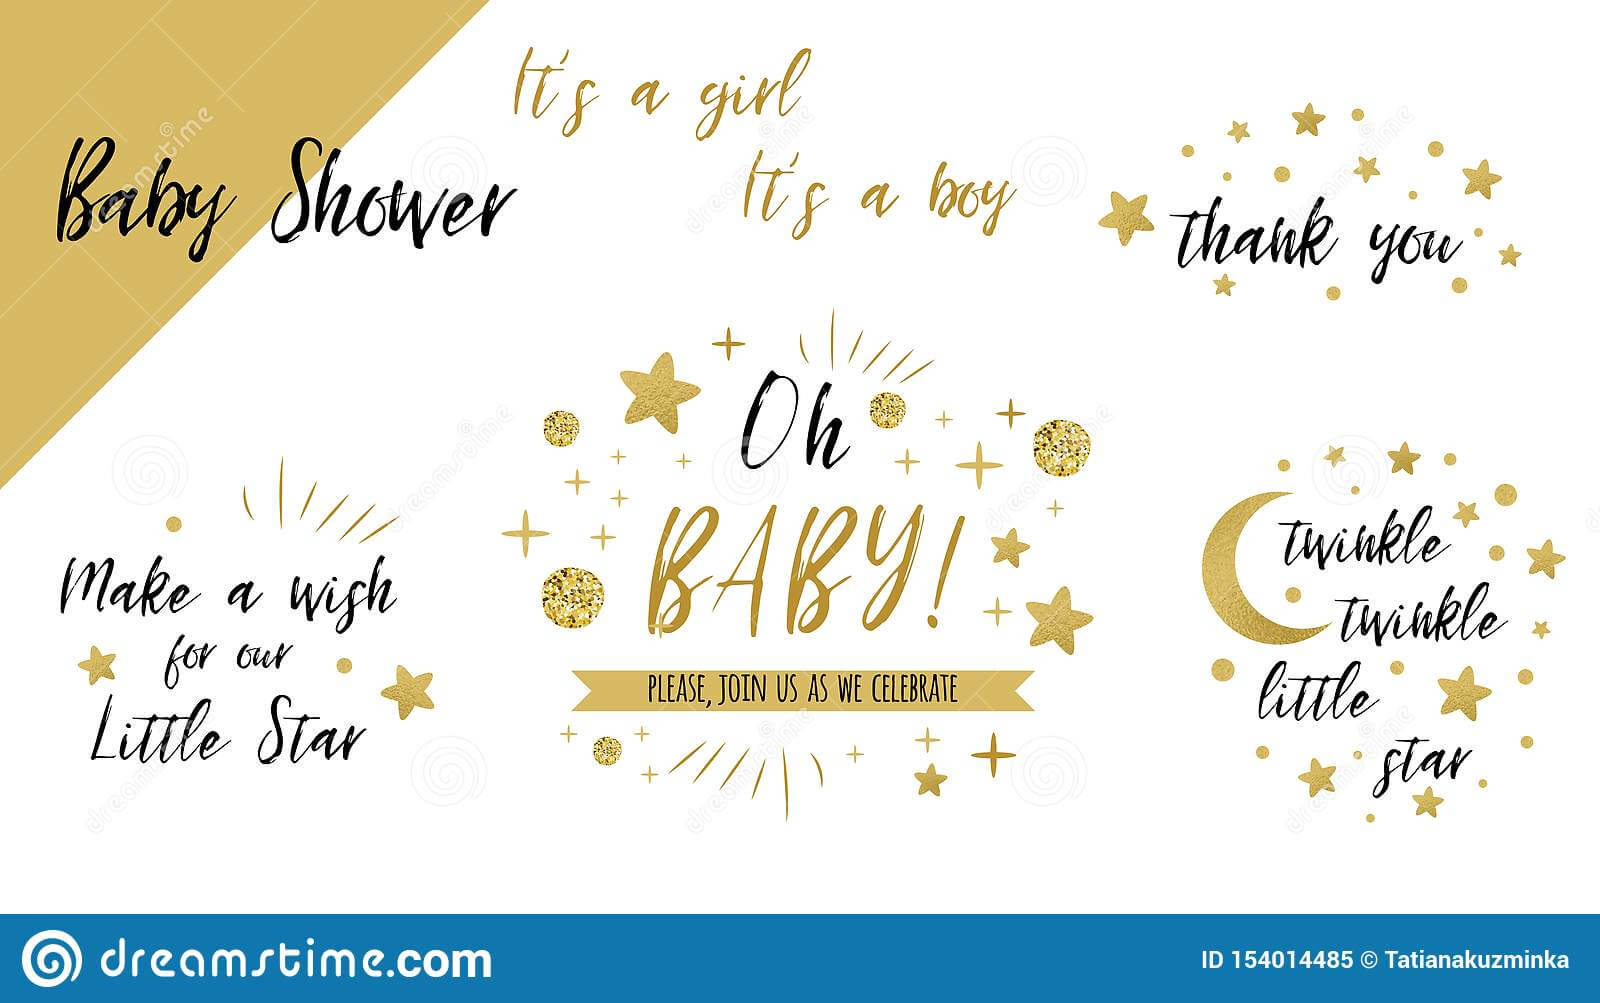 Baby Shower Set Gold Templates Twinkle Twinkle Little Star Regarding Thank You Card Template For Baby Shower